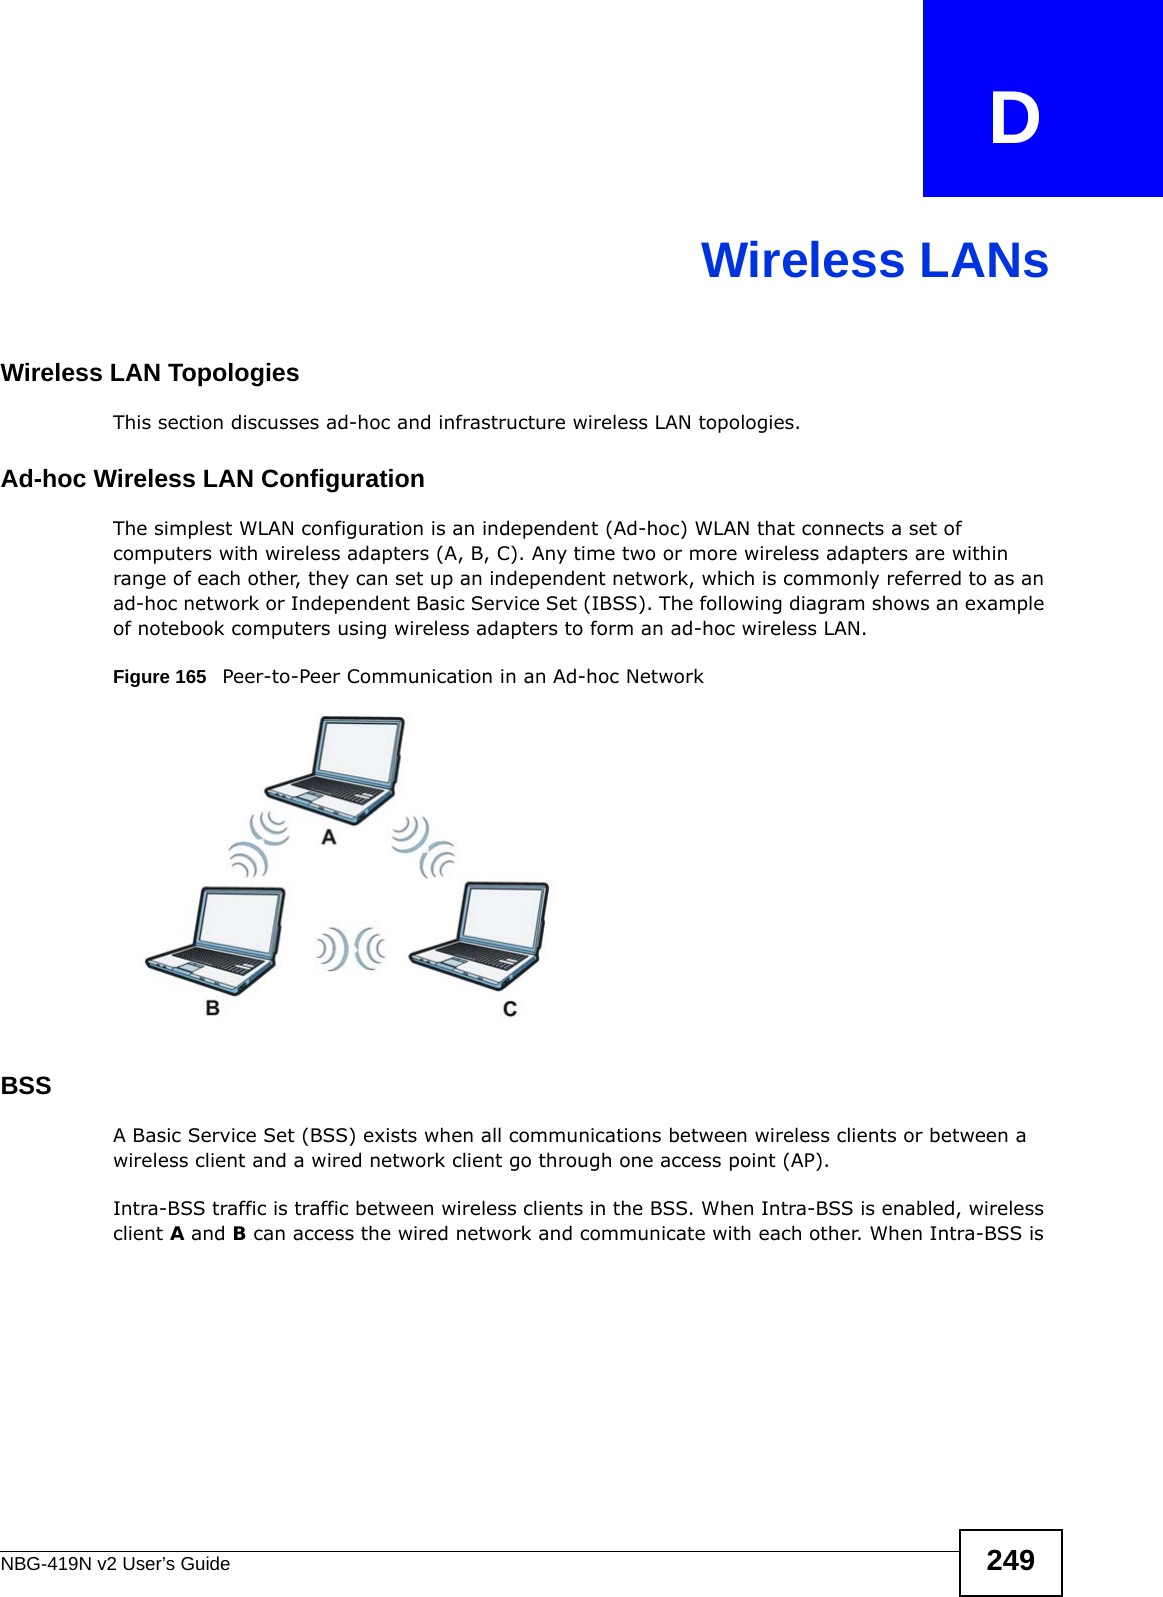 NBG-419N v2 User’s Guide 249APPENDIX   DWireless LANsWireless LAN TopologiesThis section discusses ad-hoc and infrastructure wireless LAN topologies.Ad-hoc Wireless LAN ConfigurationThe simplest WLAN configuration is an independent (Ad-hoc) WLAN that connects a set of computers with wireless adapters (A, B, C). Any time two or more wireless adapters are within range of each other, they can set up an independent network, which is commonly referred to as an ad-hoc network or Independent Basic Service Set (IBSS). The following diagram shows an example of notebook computers using wireless adapters to form an ad-hoc wireless LAN. Figure 165   Peer-to-Peer Communication in an Ad-hoc NetworkBSSA Basic Service Set (BSS) exists when all communications between wireless clients or between a wireless client and a wired network client go through one access point (AP). Intra-BSS traffic is traffic between wireless clients in the BSS. When Intra-BSS is enabled, wireless client A and B can access the wired network and communicate with each other. When Intra-BSS is 